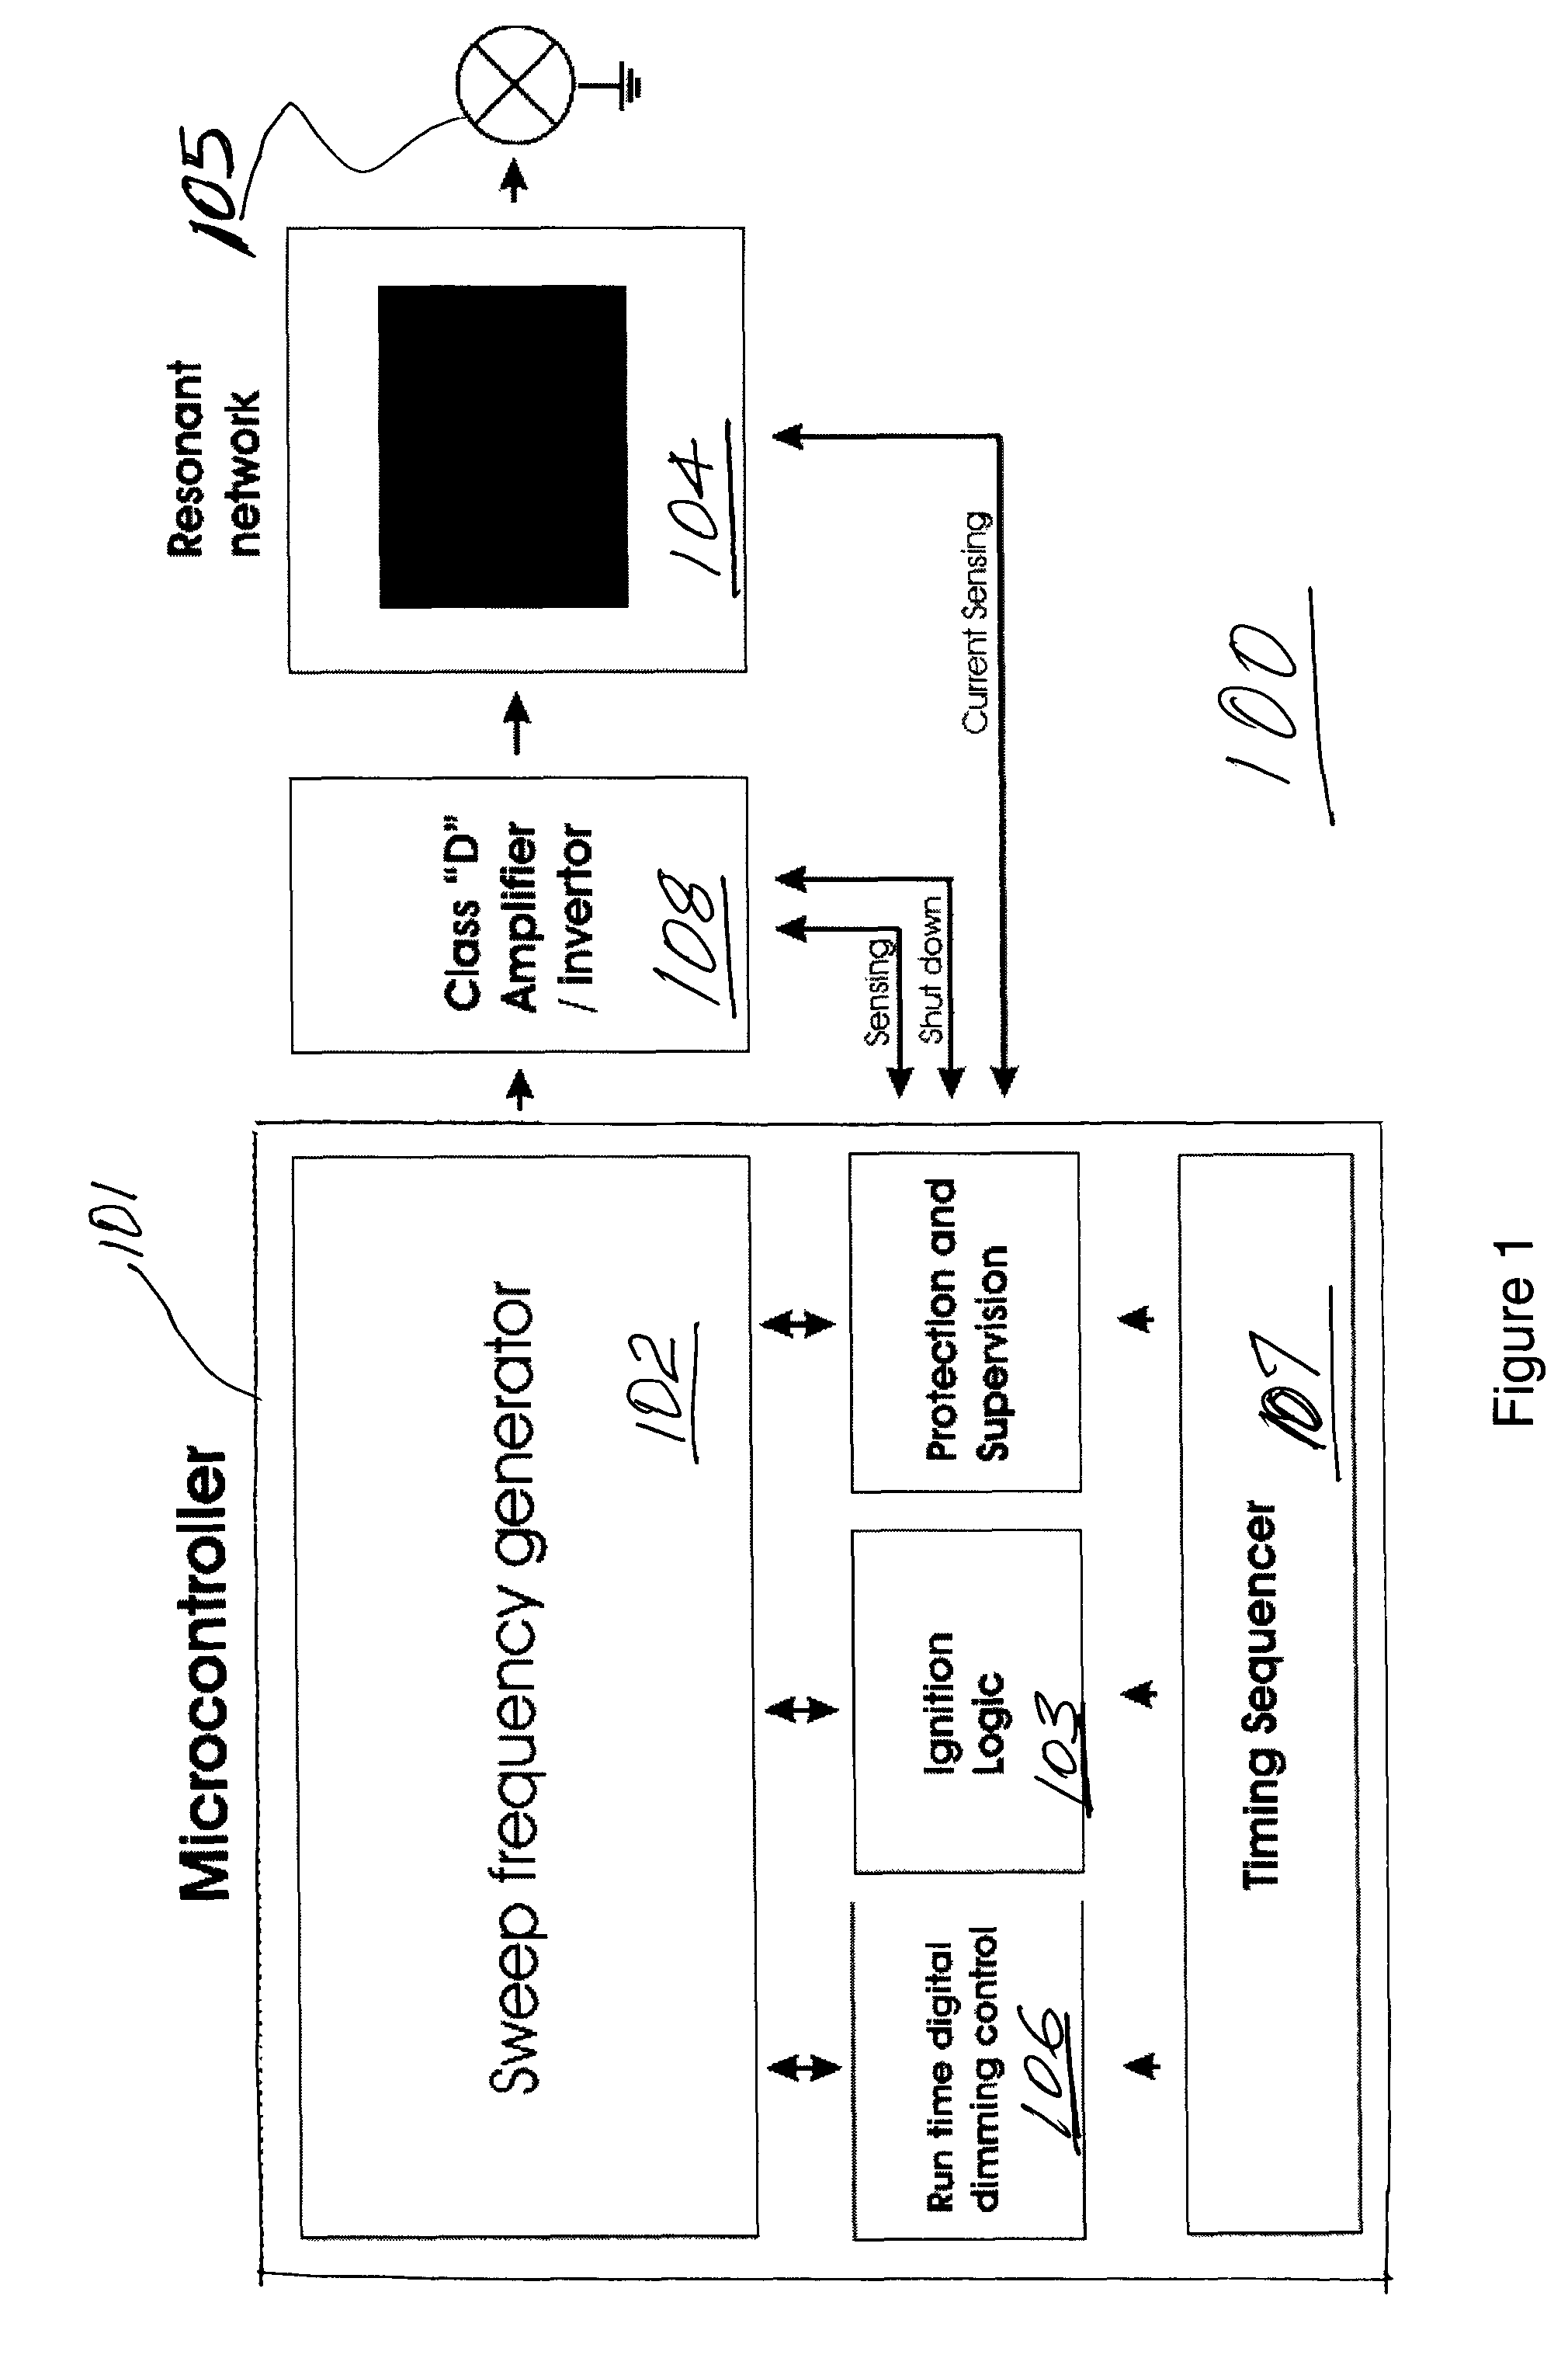 Method and apparatus for achieving inherent ignition voltage in operation of a high intensity discharge lamp